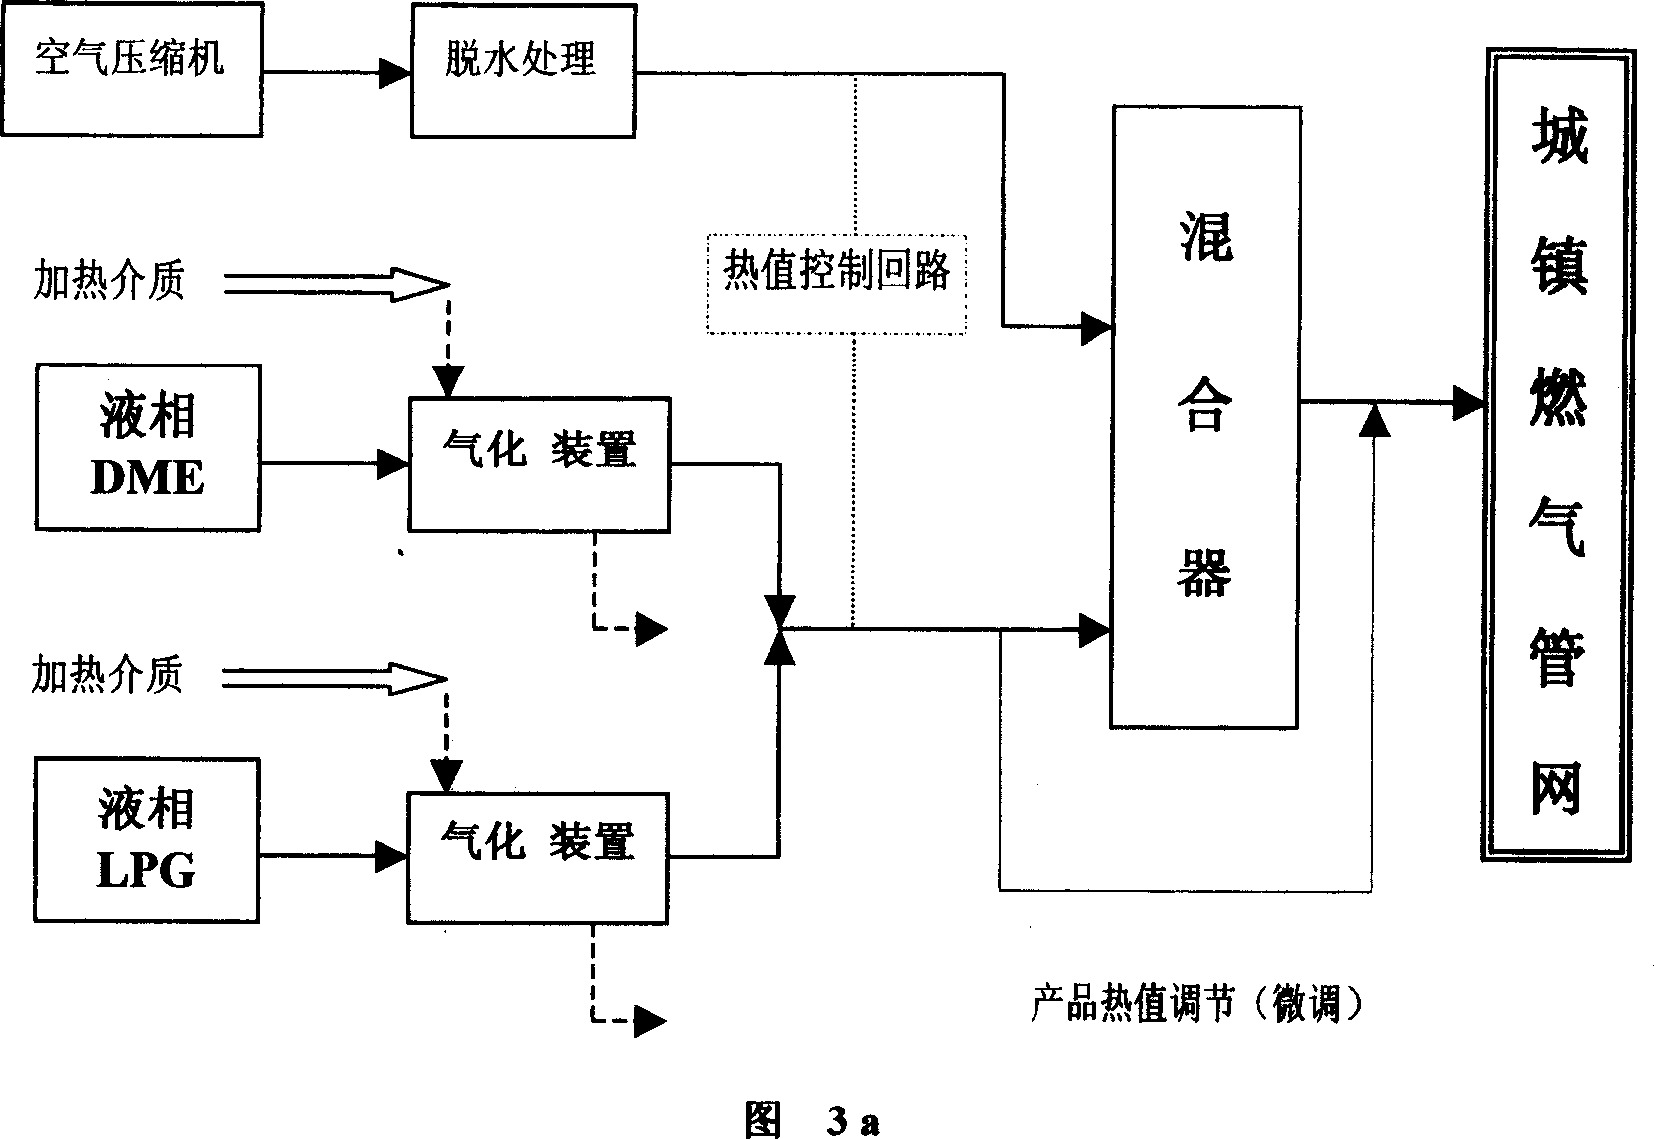 Process of producing natural gas substitute with dimethyl ether as material